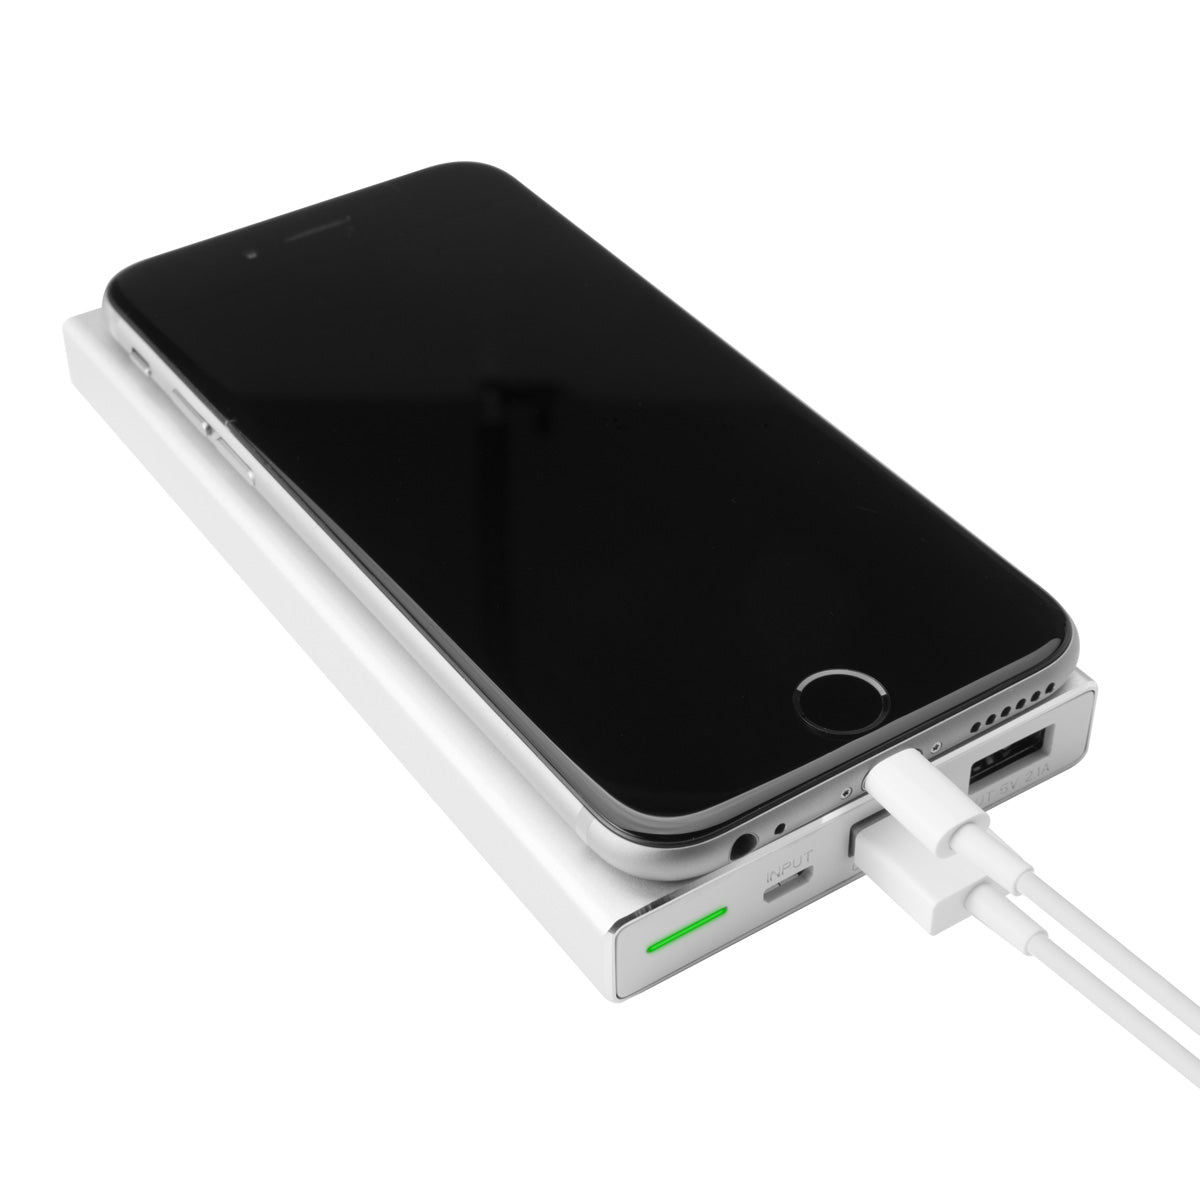 Tether Tools Rock Solid External Battery Pack 10,000 mAh